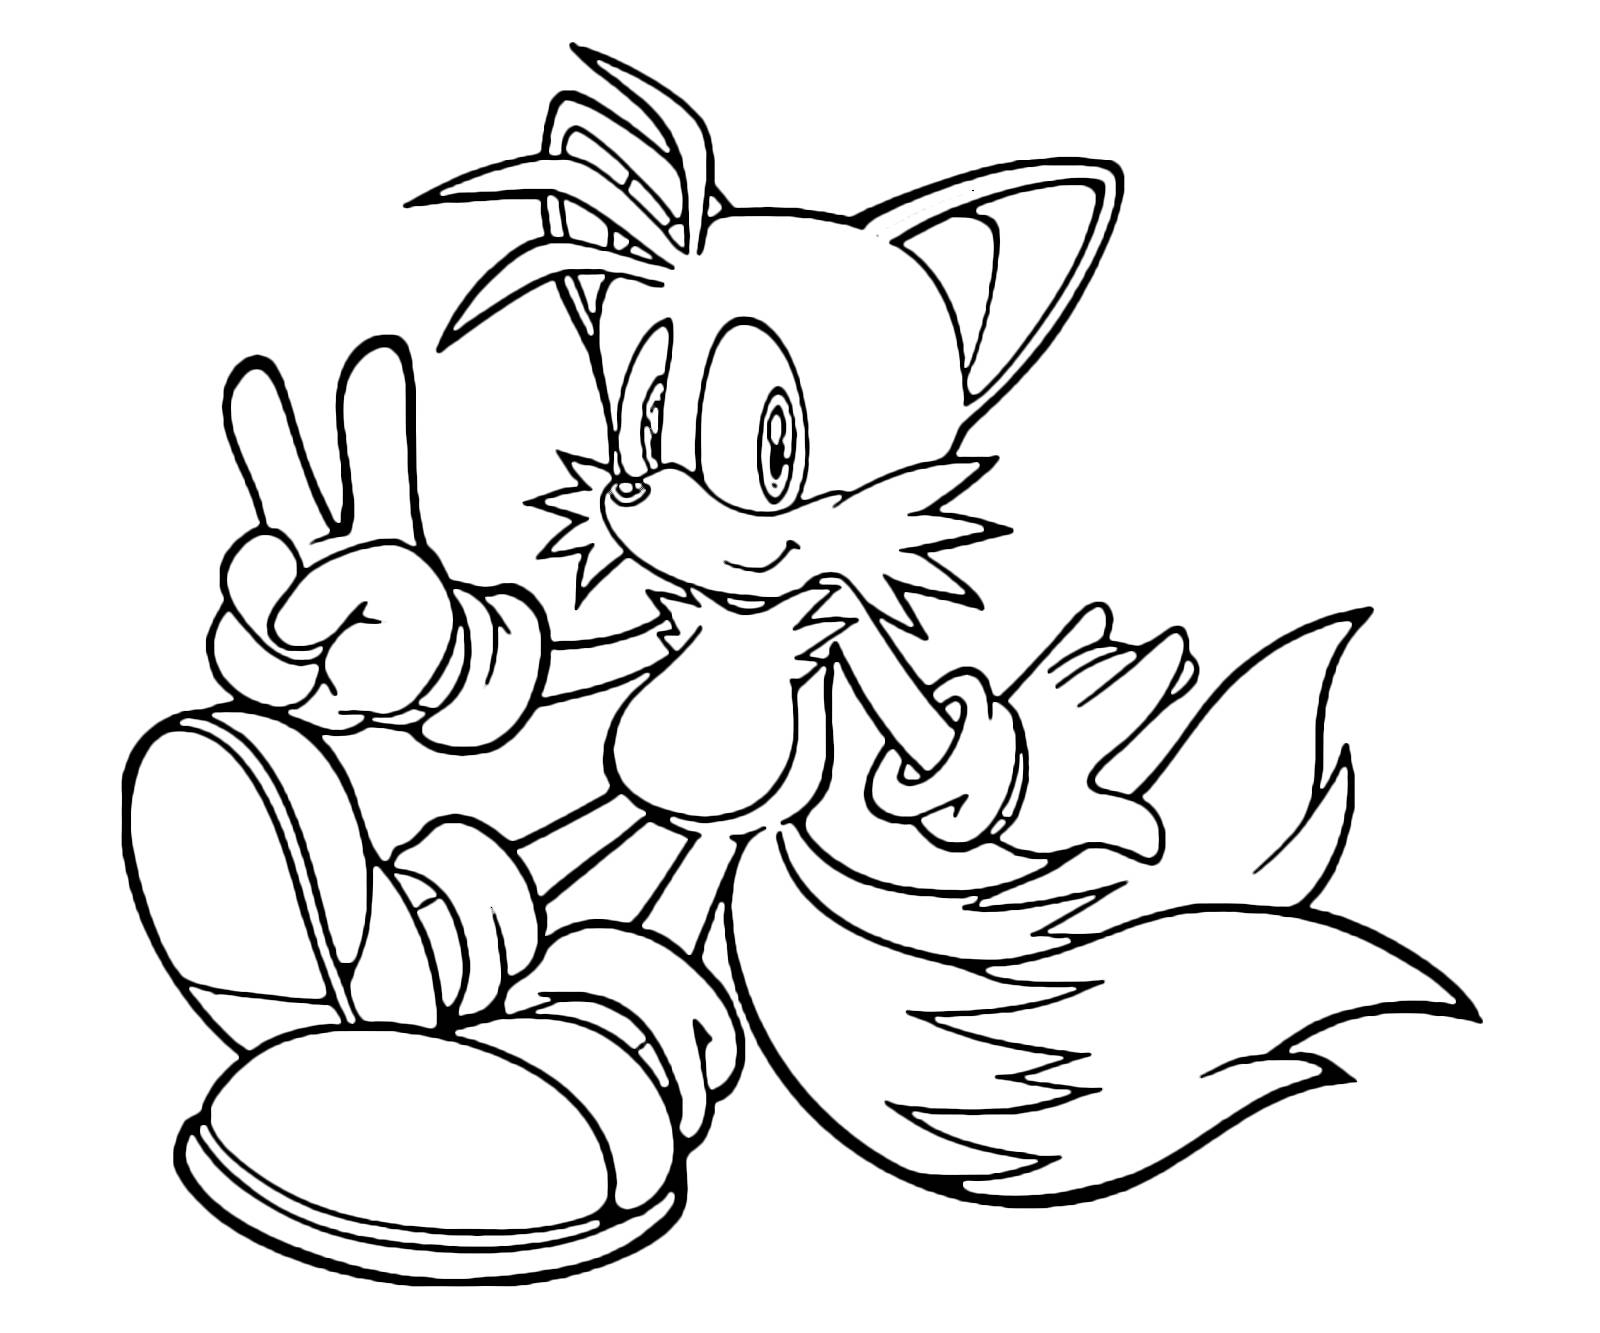 Glorious tails coloring page